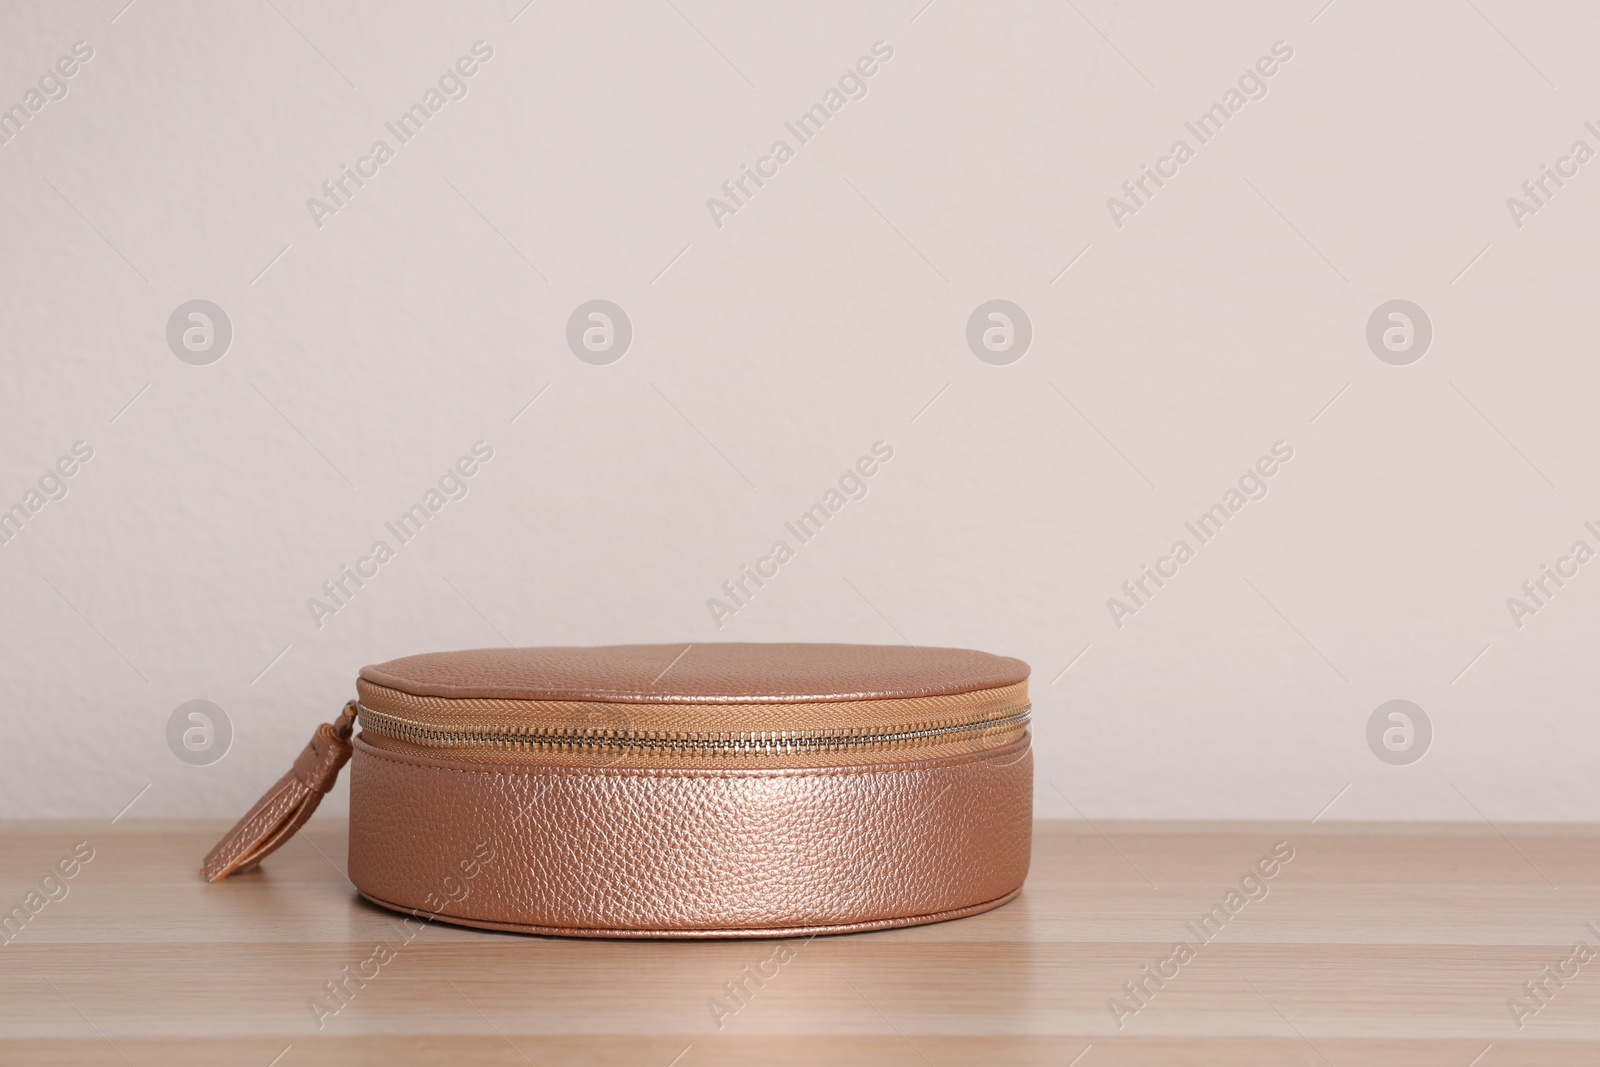 Photo of Stylish leather woman's bag on wooden table